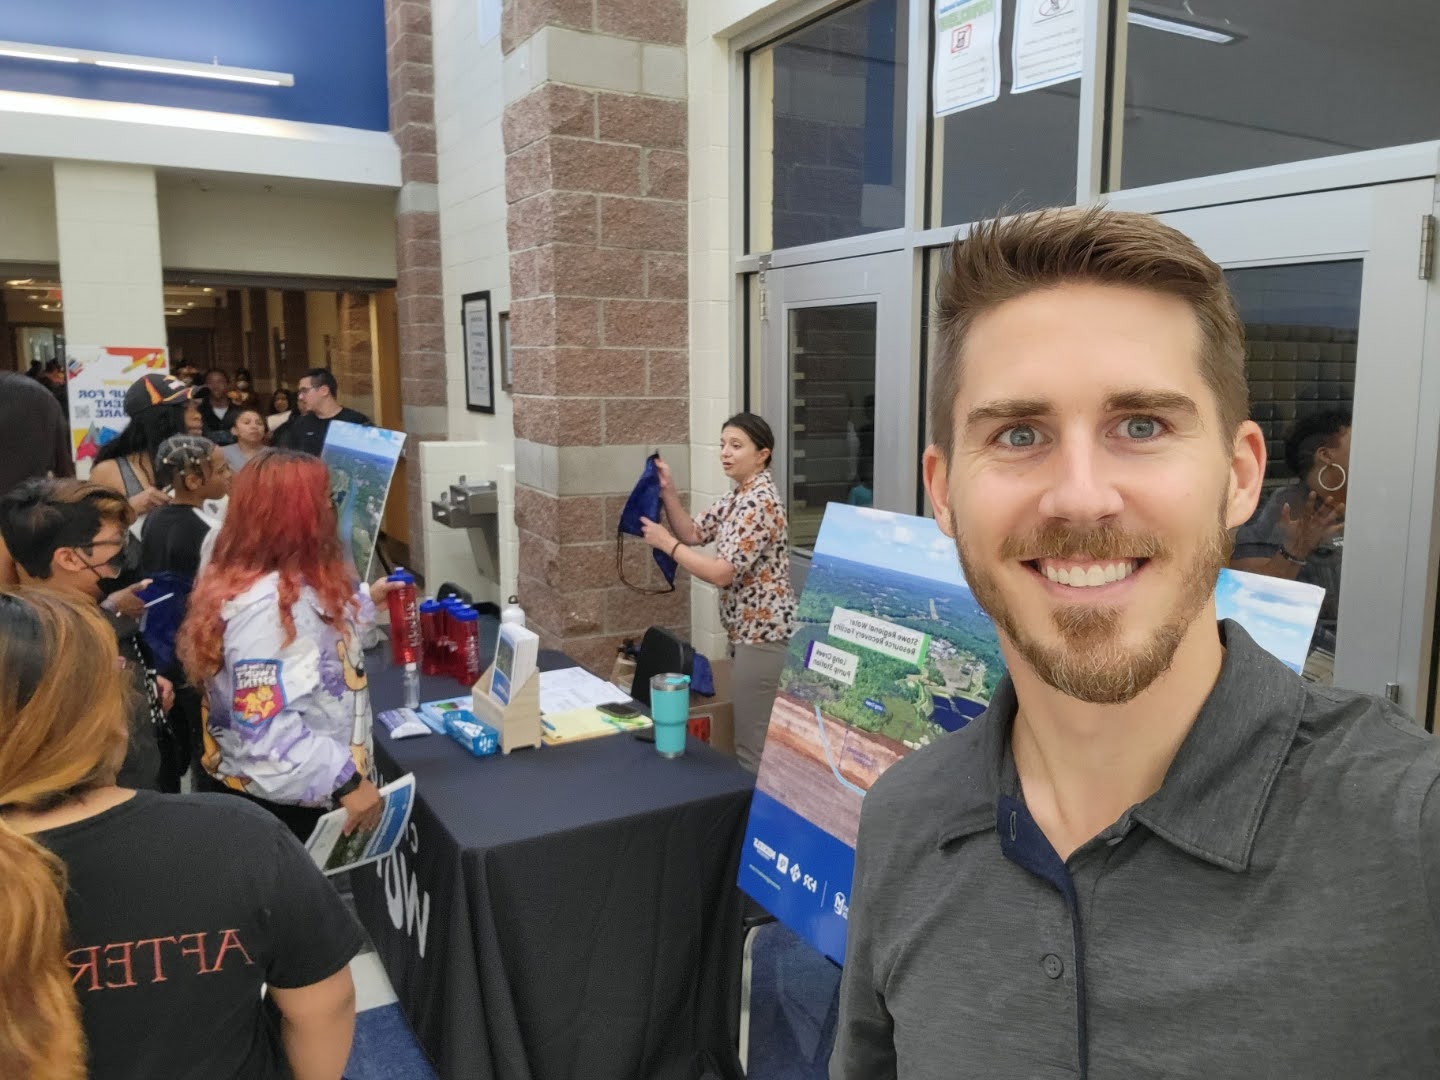 Stowe Project Manager Will Shull takes a selfie in front of Charlotte Water's information table, where a woman hands out backpacks to students.